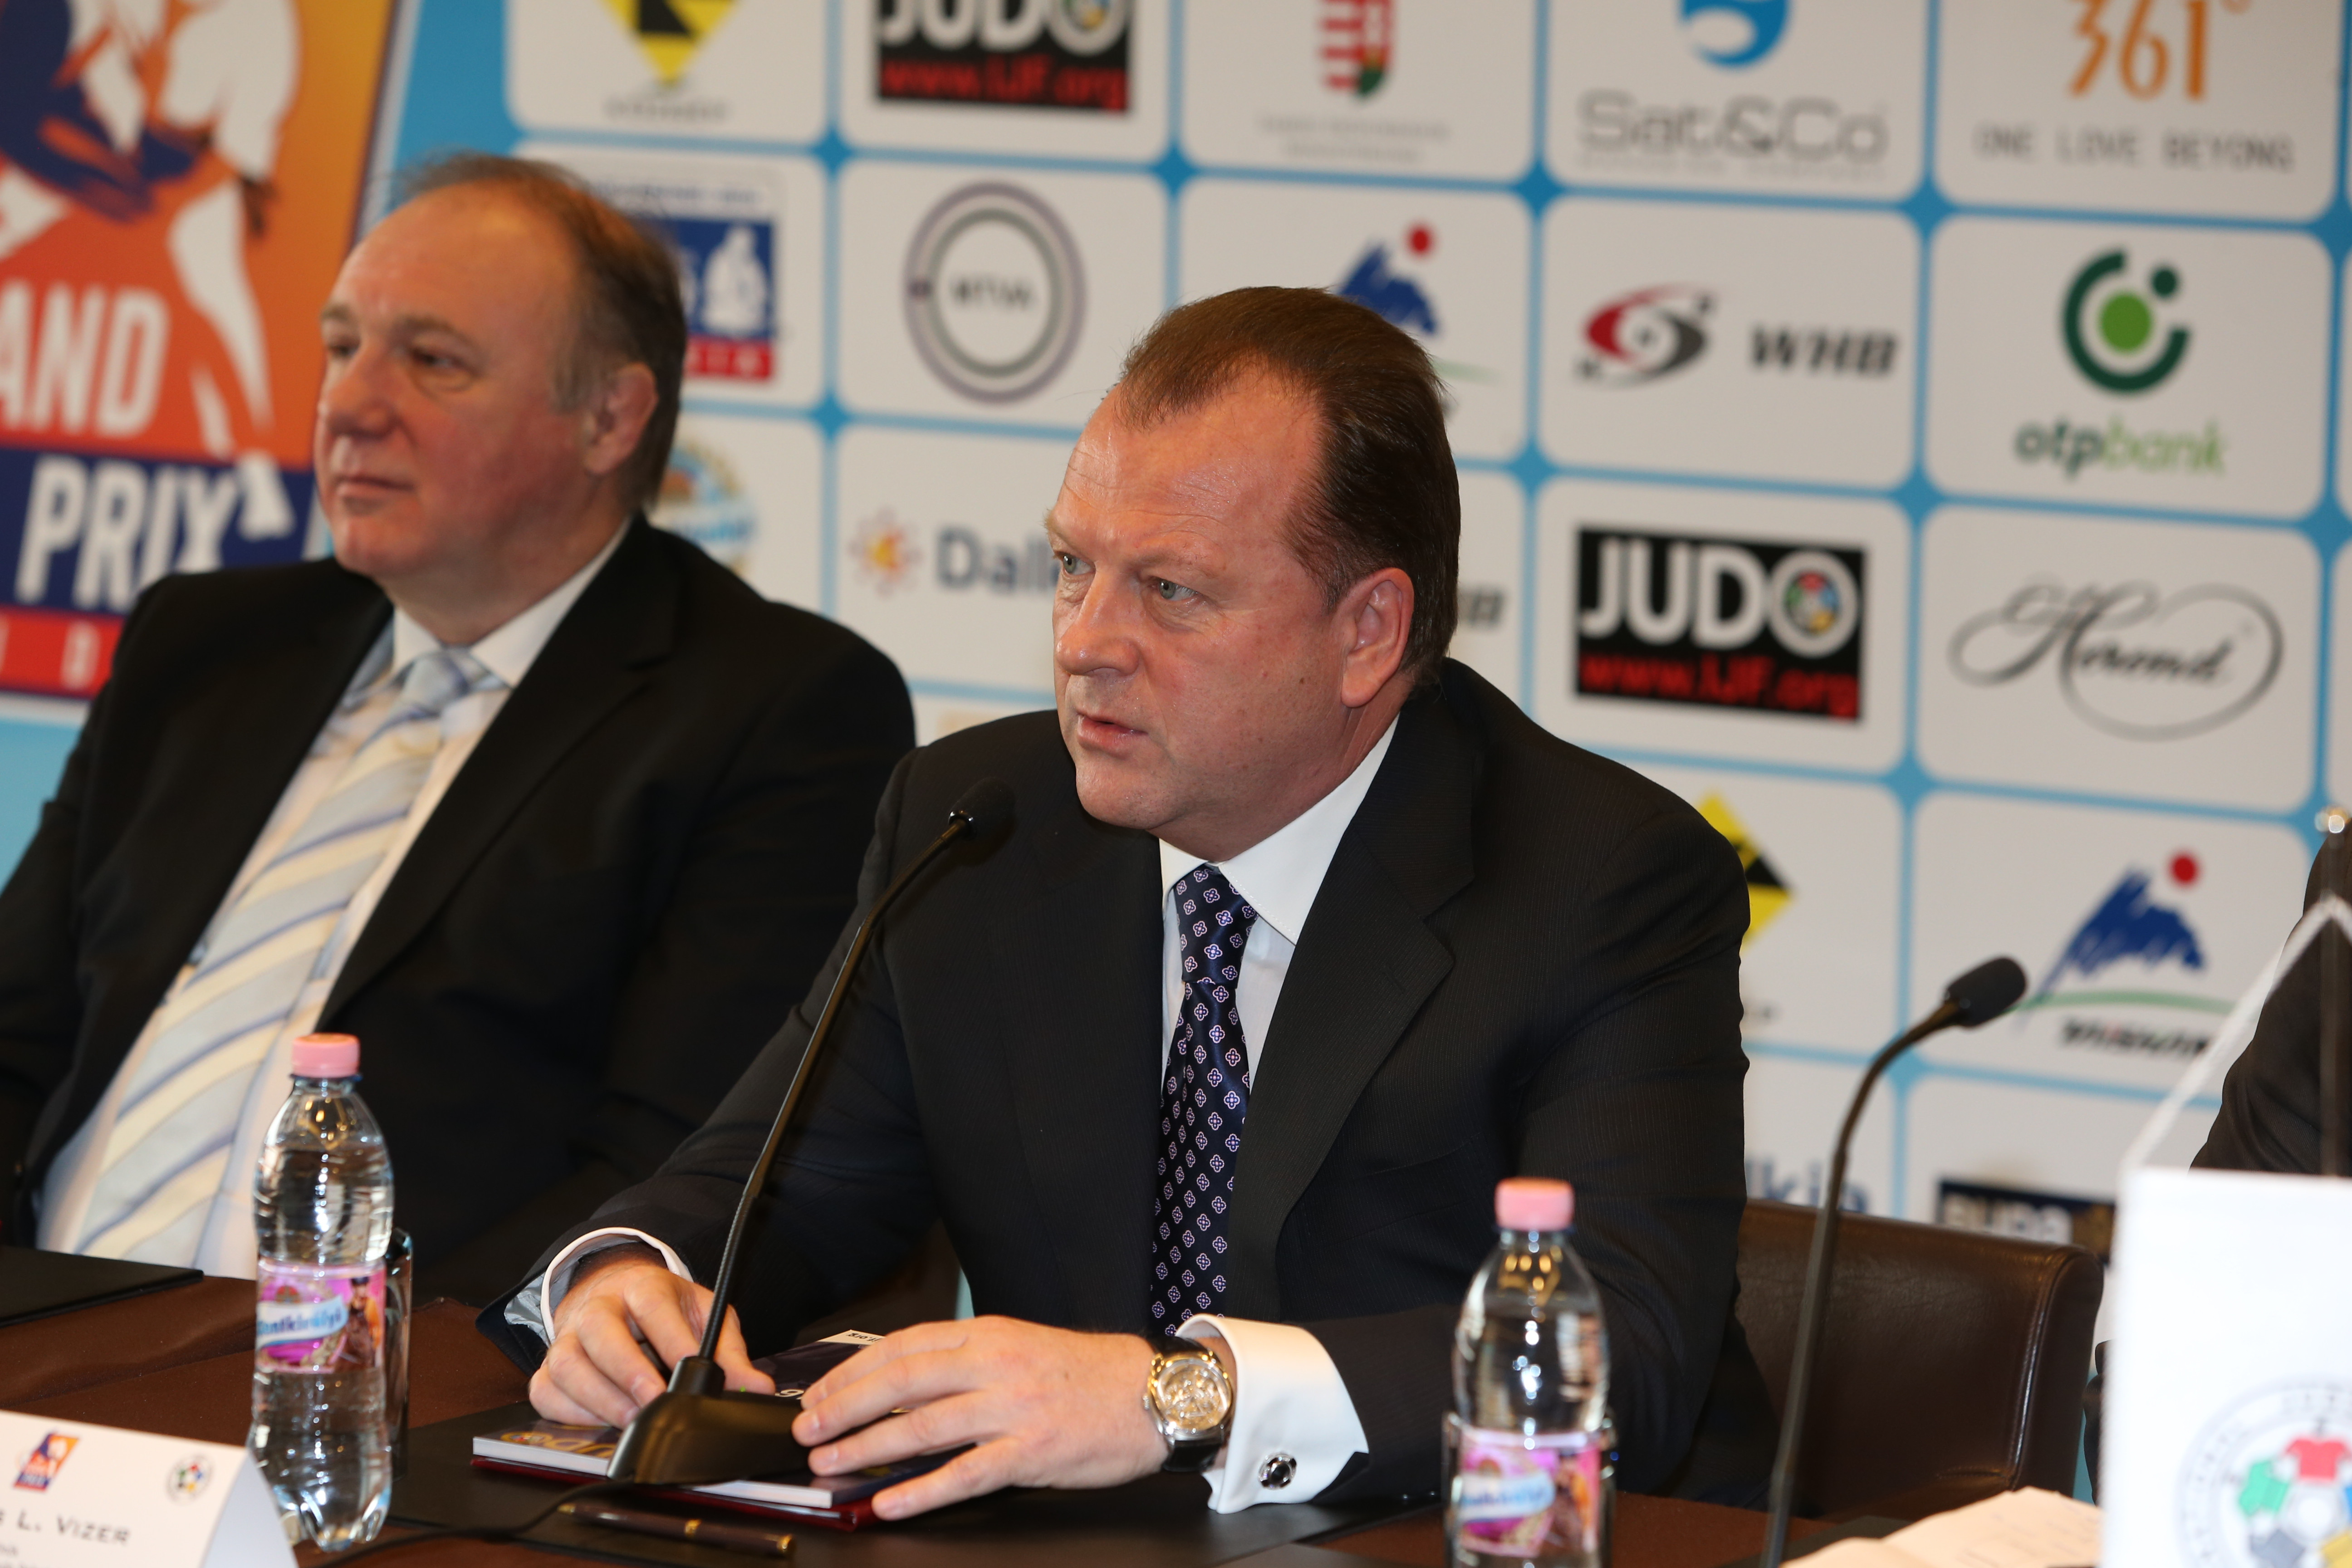 IJF President Statement: ‘The Migration of Judokas To Other Sports Will Spiritually Contaminate Judo’